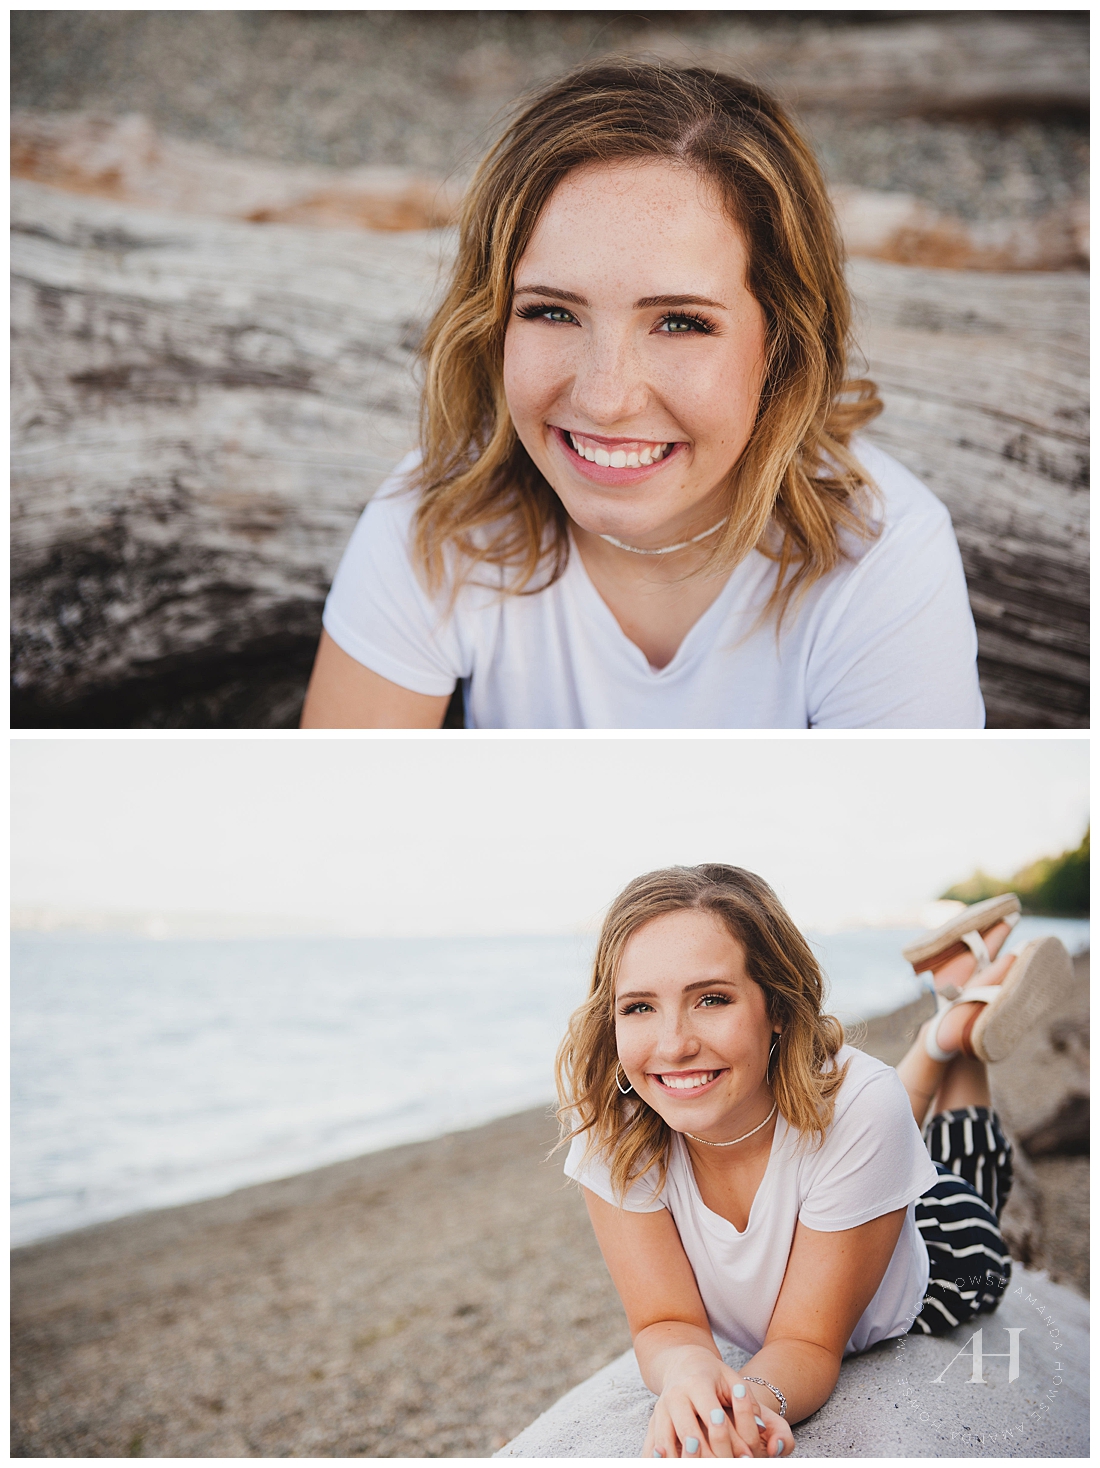 Senior Portraits on the Beach Barefoot with Cute Outfit Ideas Photographed by Tacoma Senior Photographer Amanda Howse